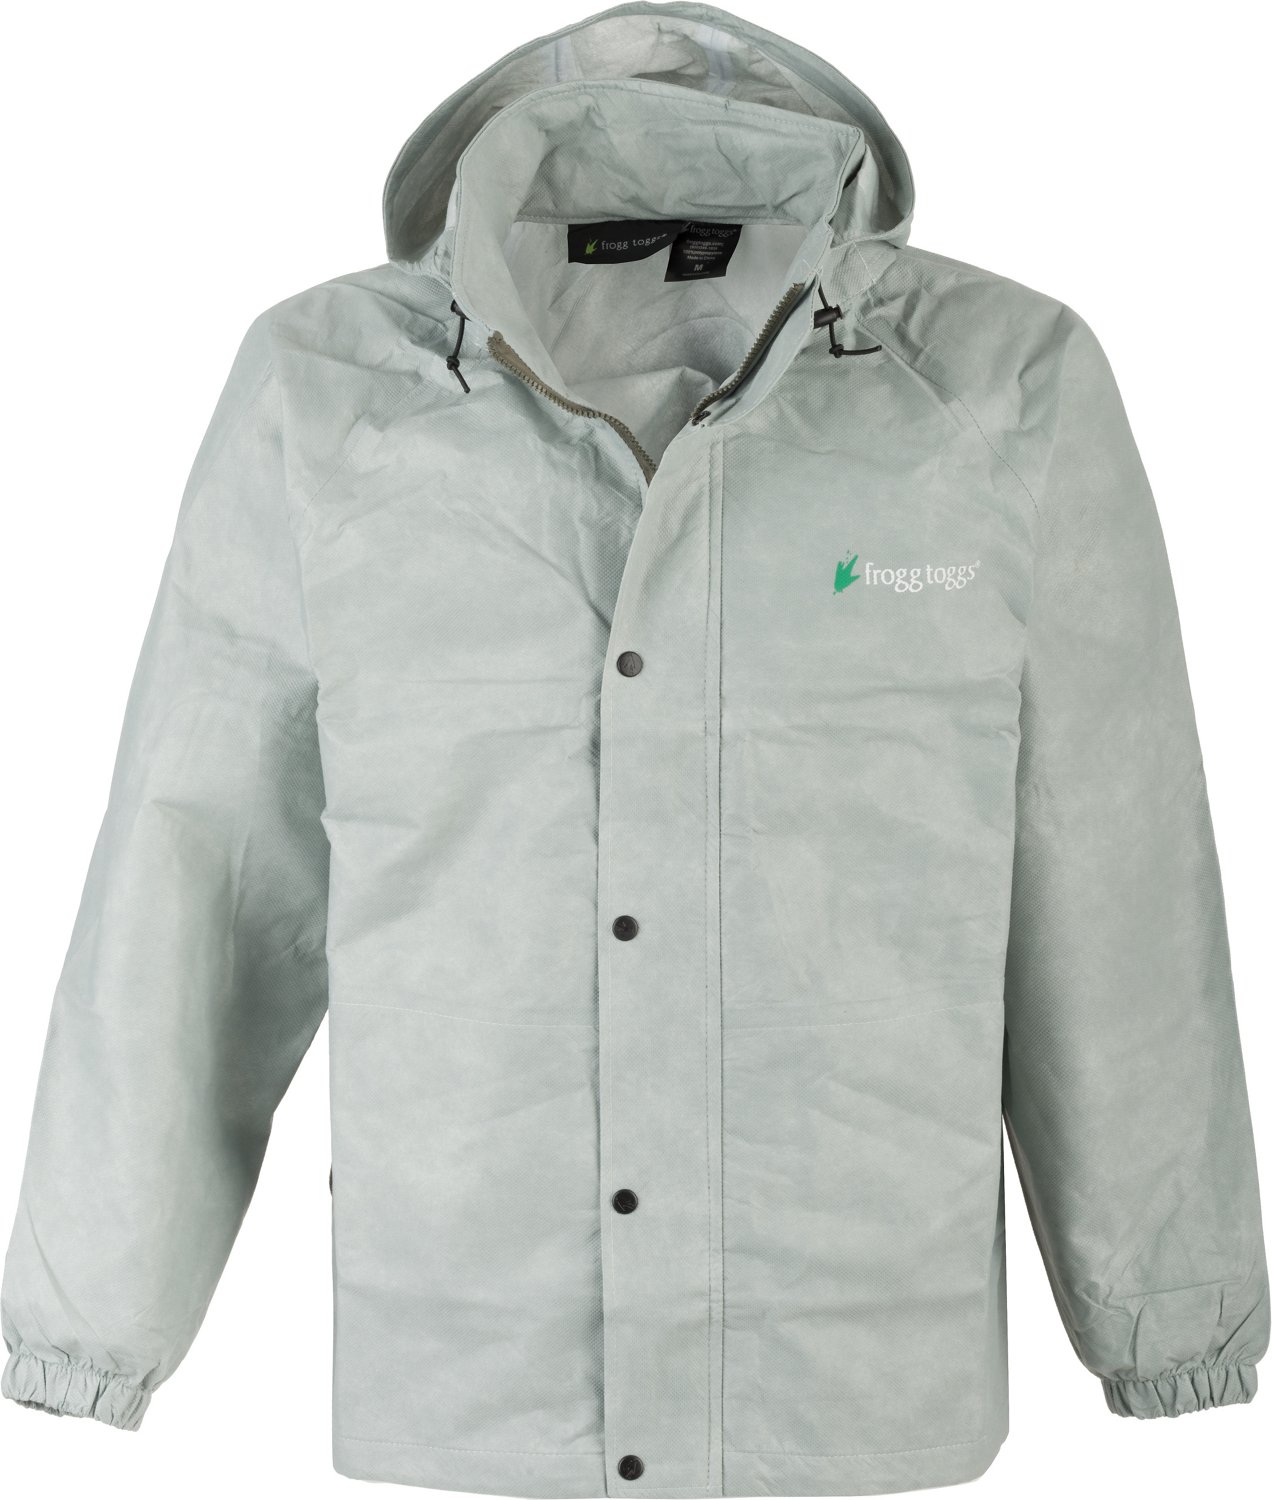 Frogg toggs Men's Pro Action/Advantage Rain Jacket                                                                               - view number 1 selected